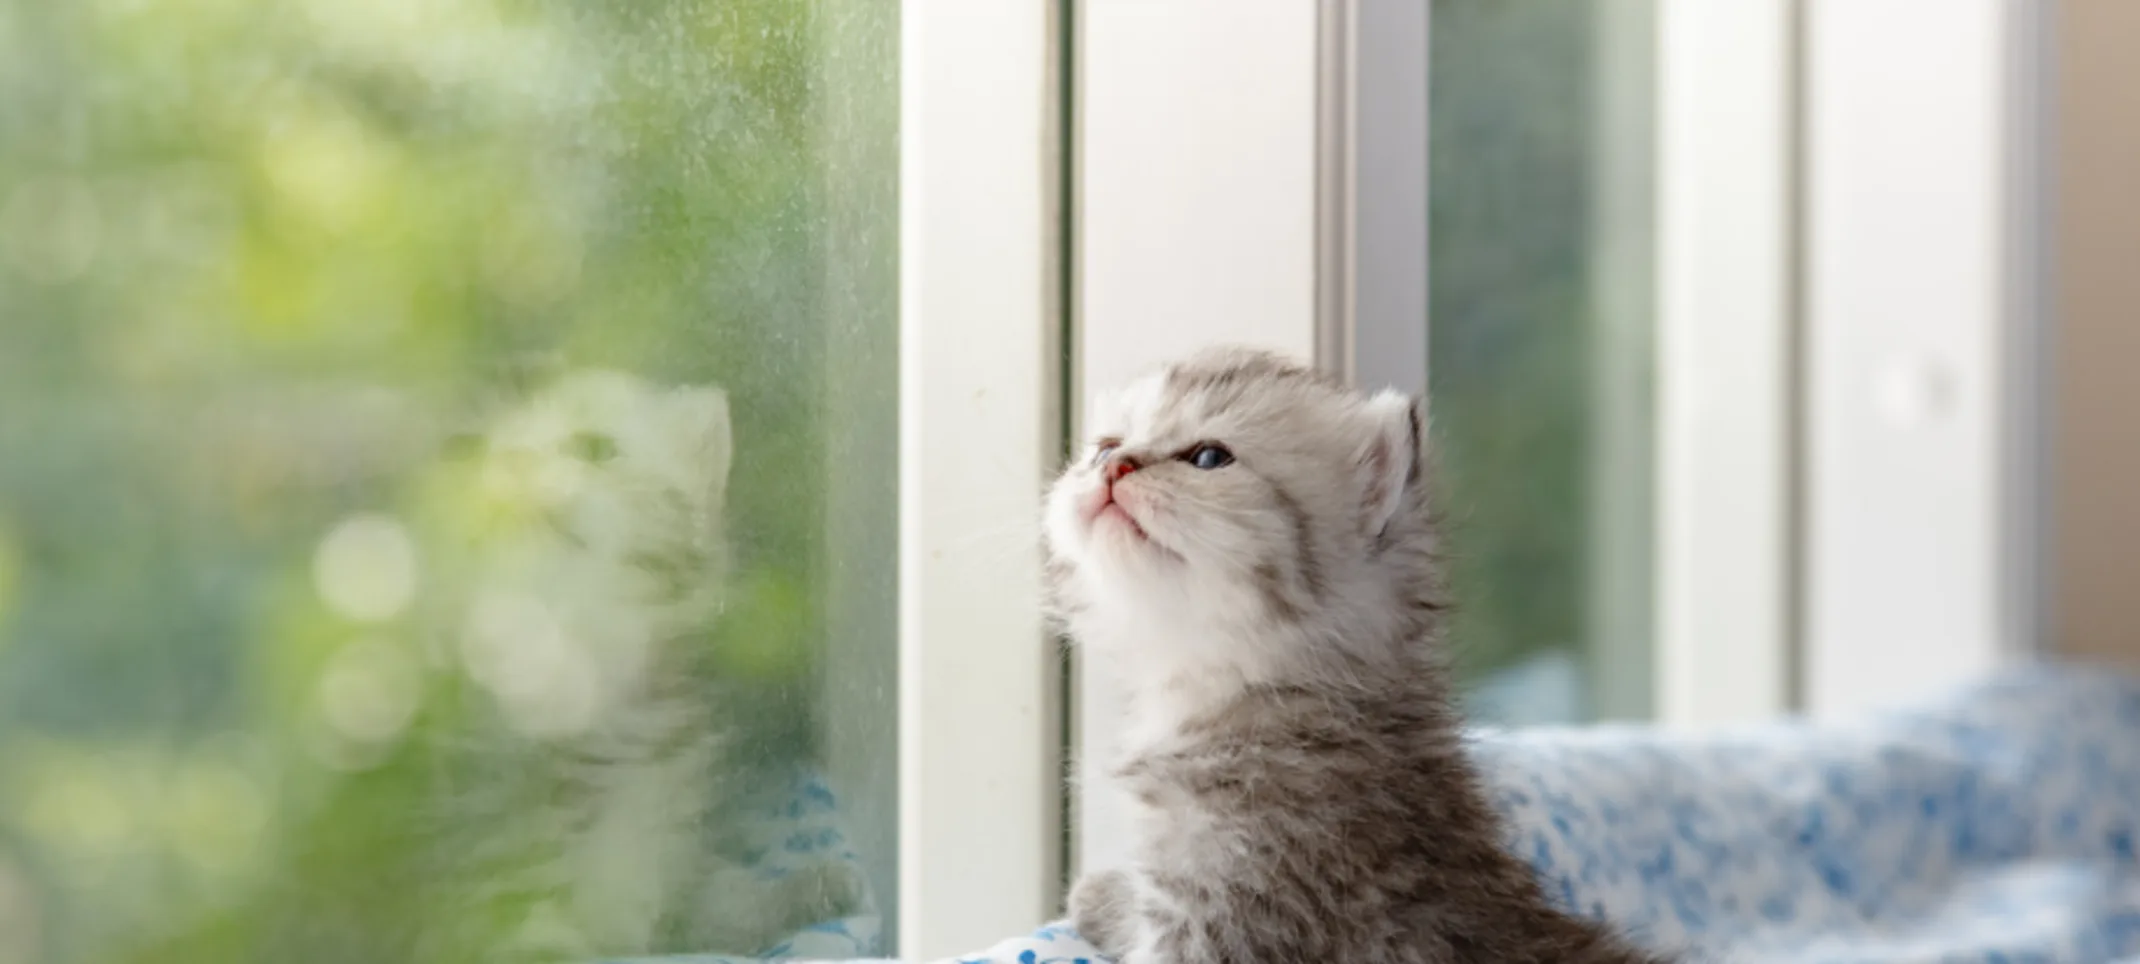 A gray kitten sitting on a blue blanket looking out the window